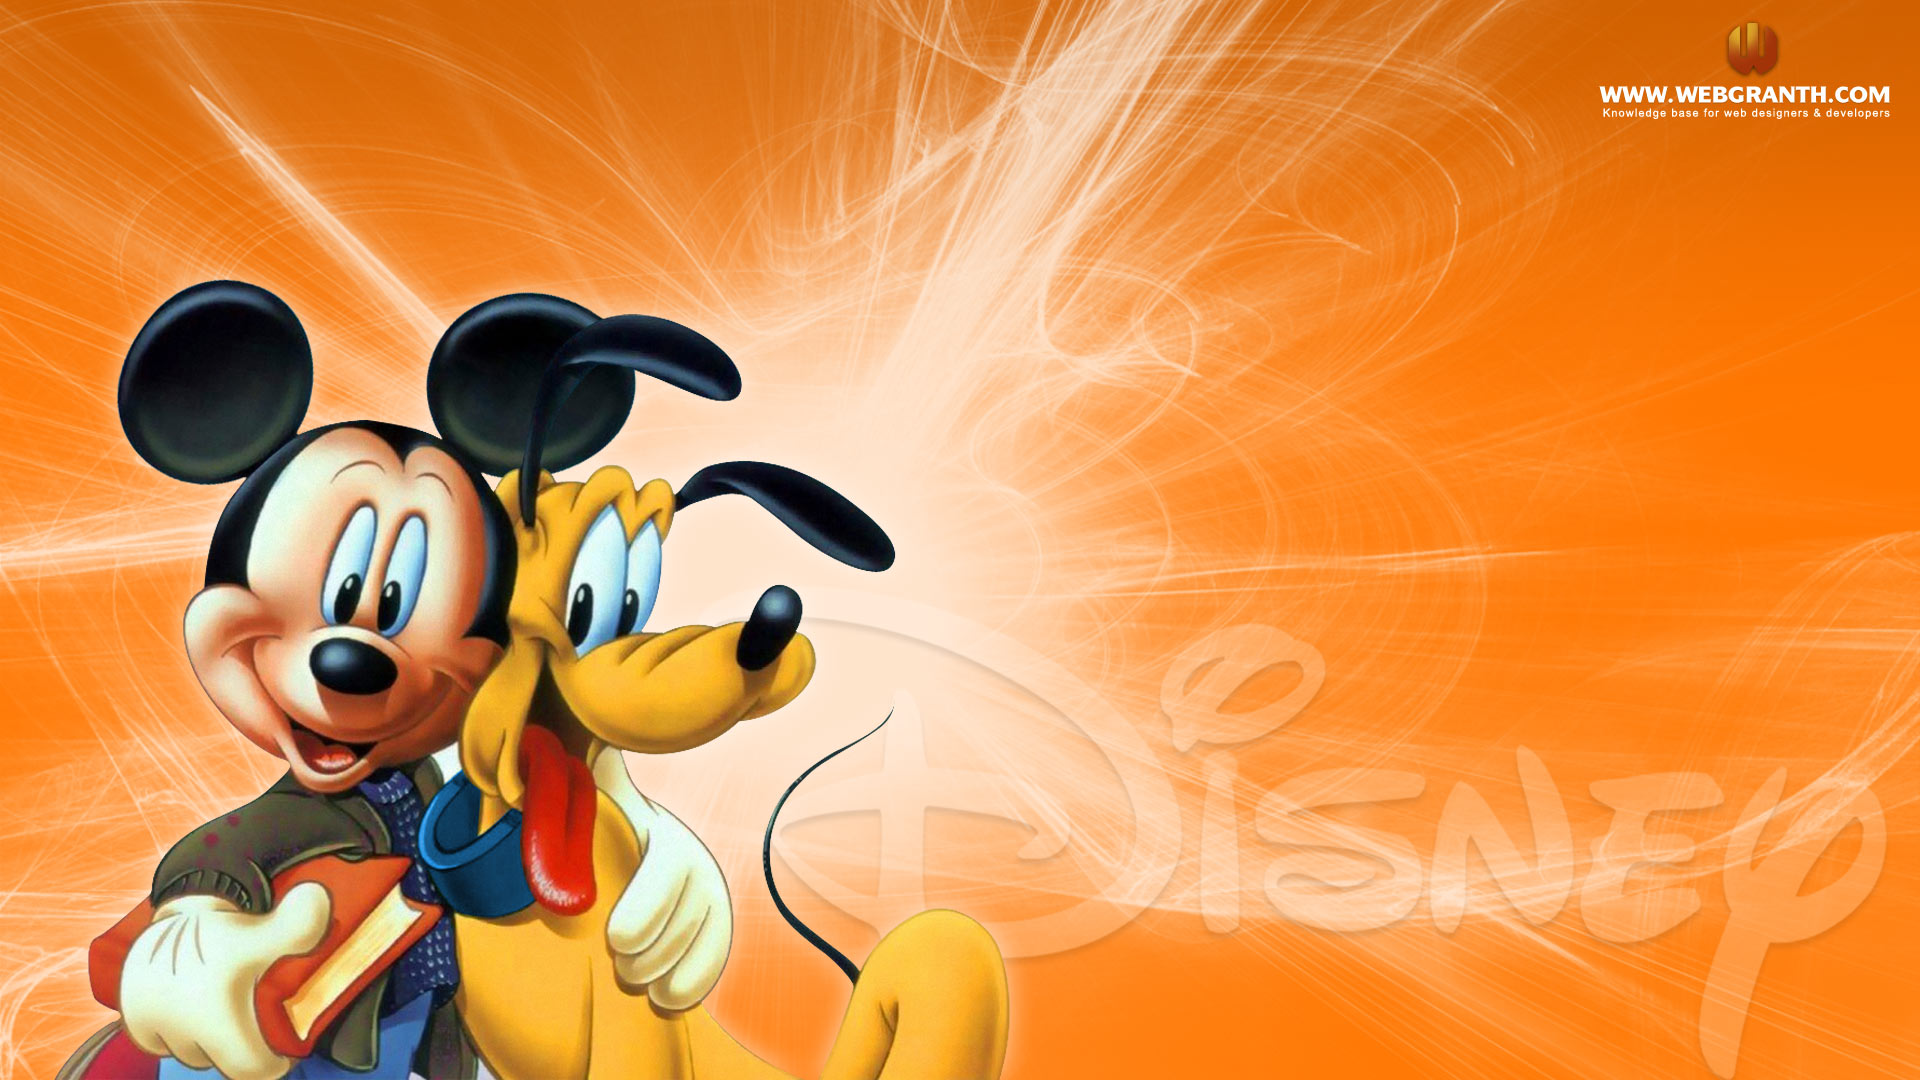 Cartoon Mickey Mouse Wallpaper - Mickey Mouse - 1920x1080 Wallpaper -  